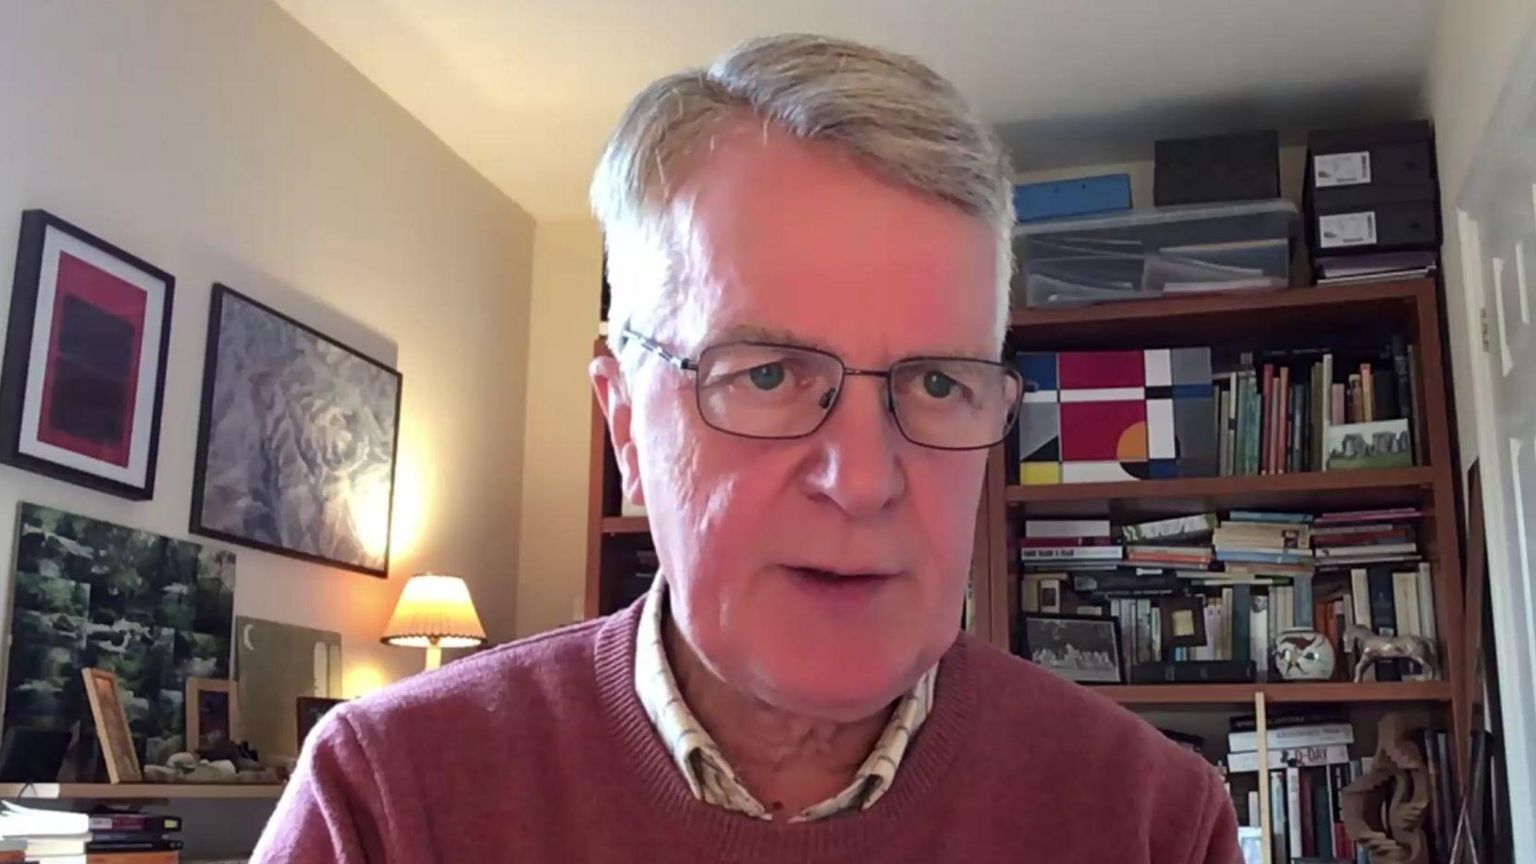 John Adams wears glasses on an online video call, with bookshelves in the background and wearing a red jumper